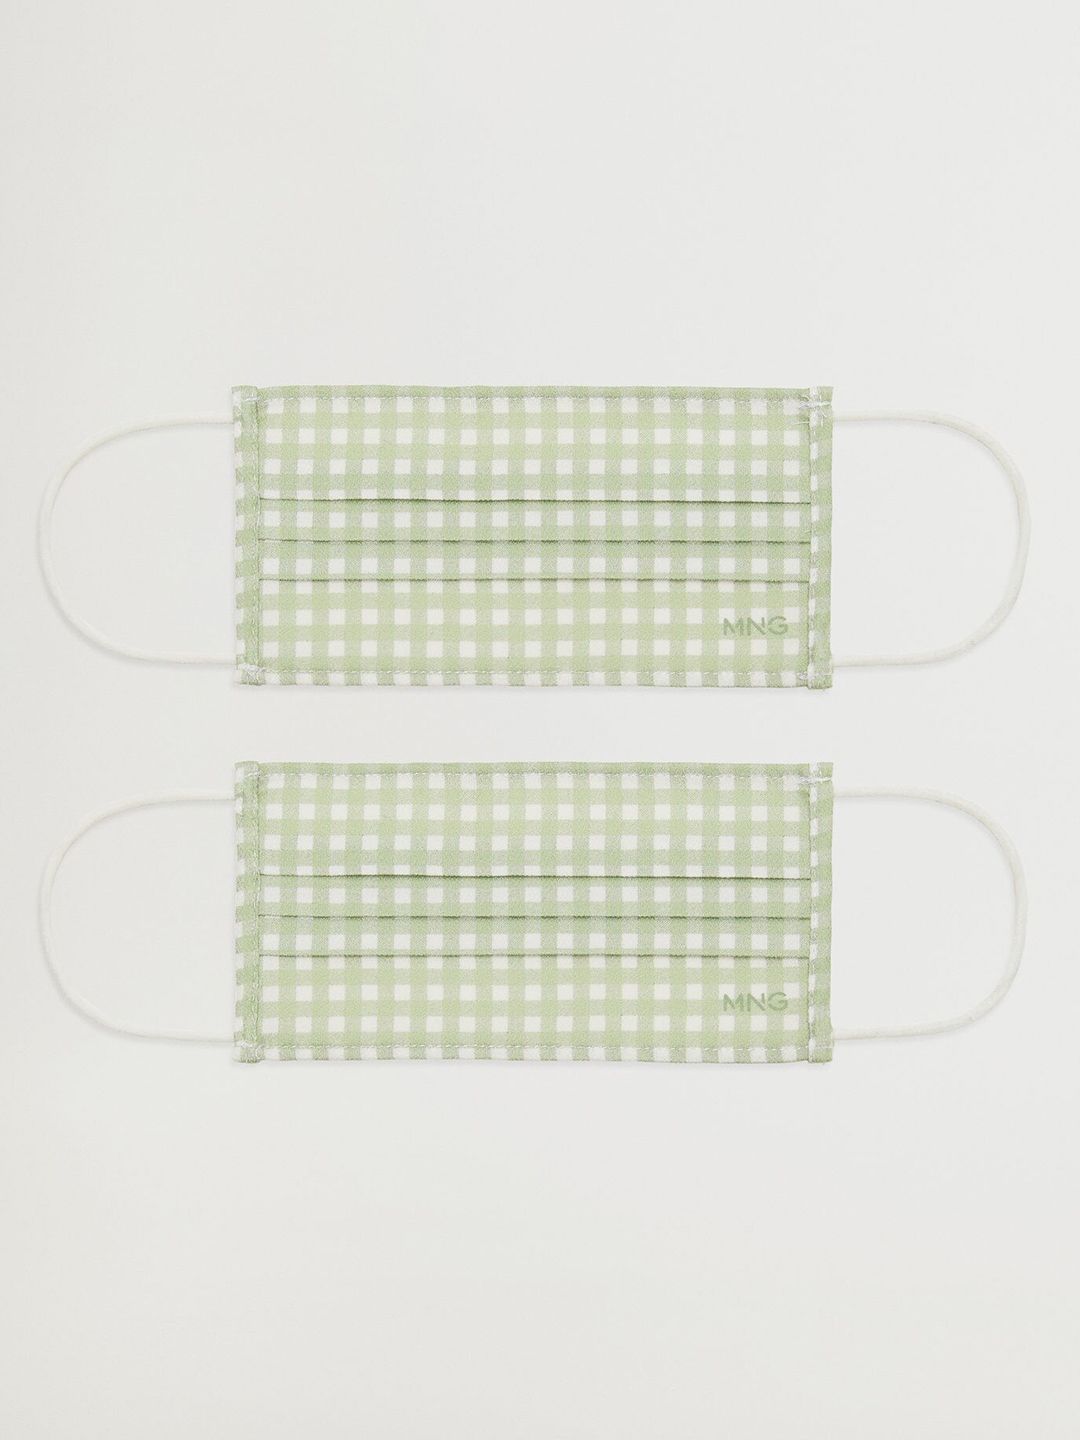 MANGO Women Pack of 2 Green & White Checked 2 Ply Hygienic Reusable Masks Price in India